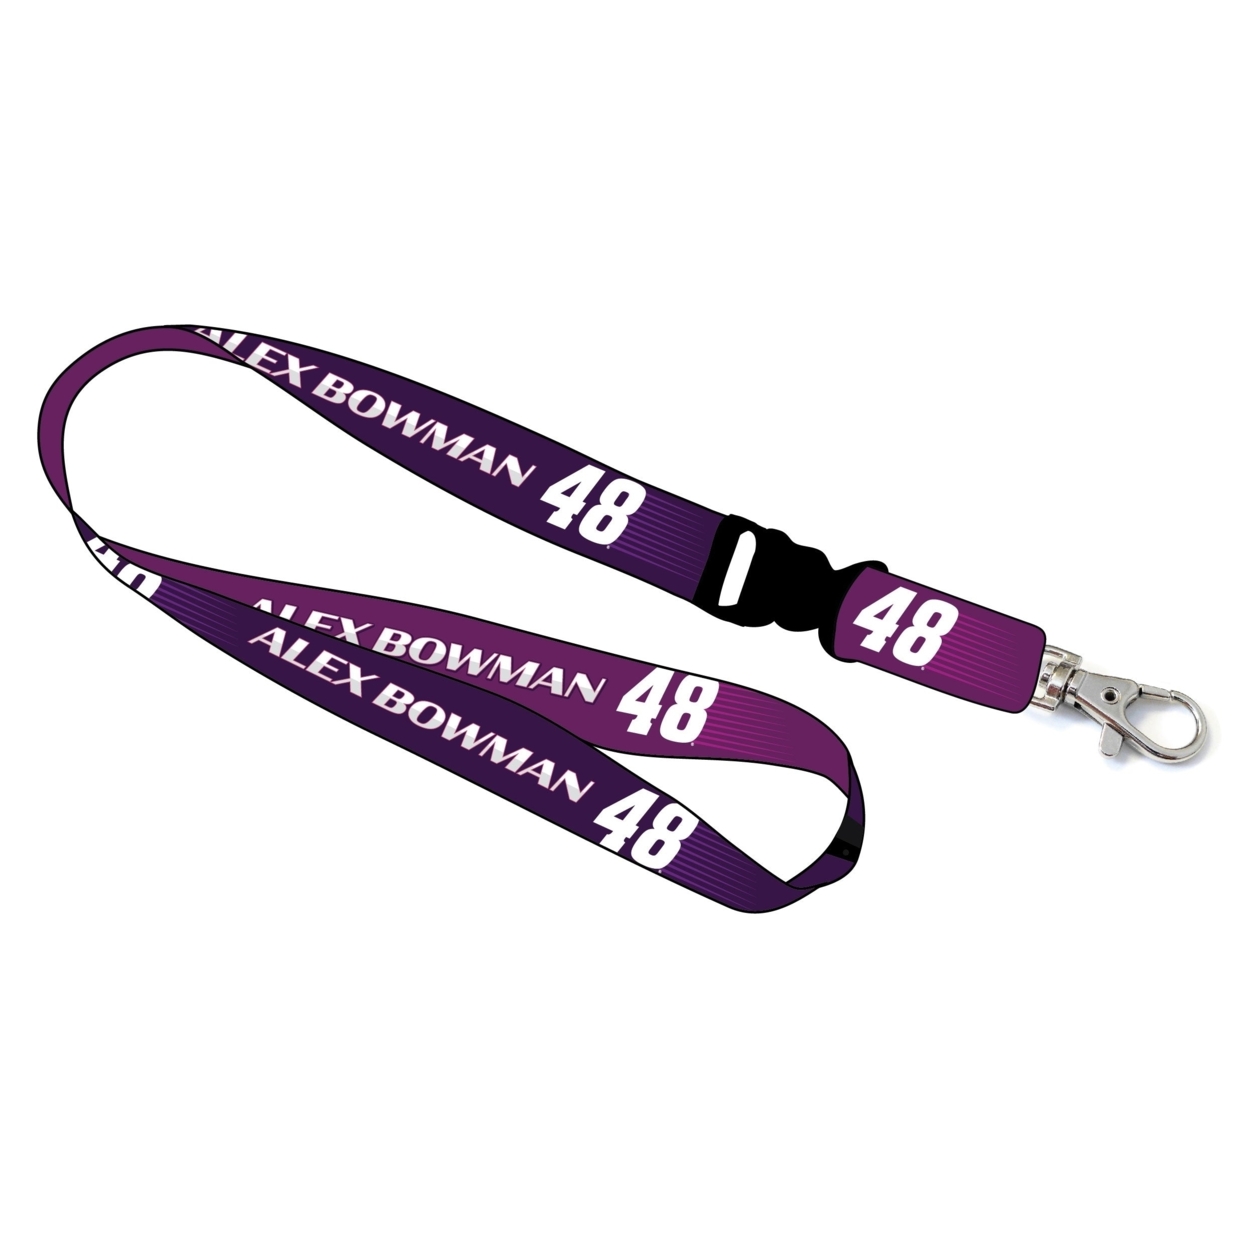 Alex Bowman #48 NASCAR Cup Series Lanyard New For 2021